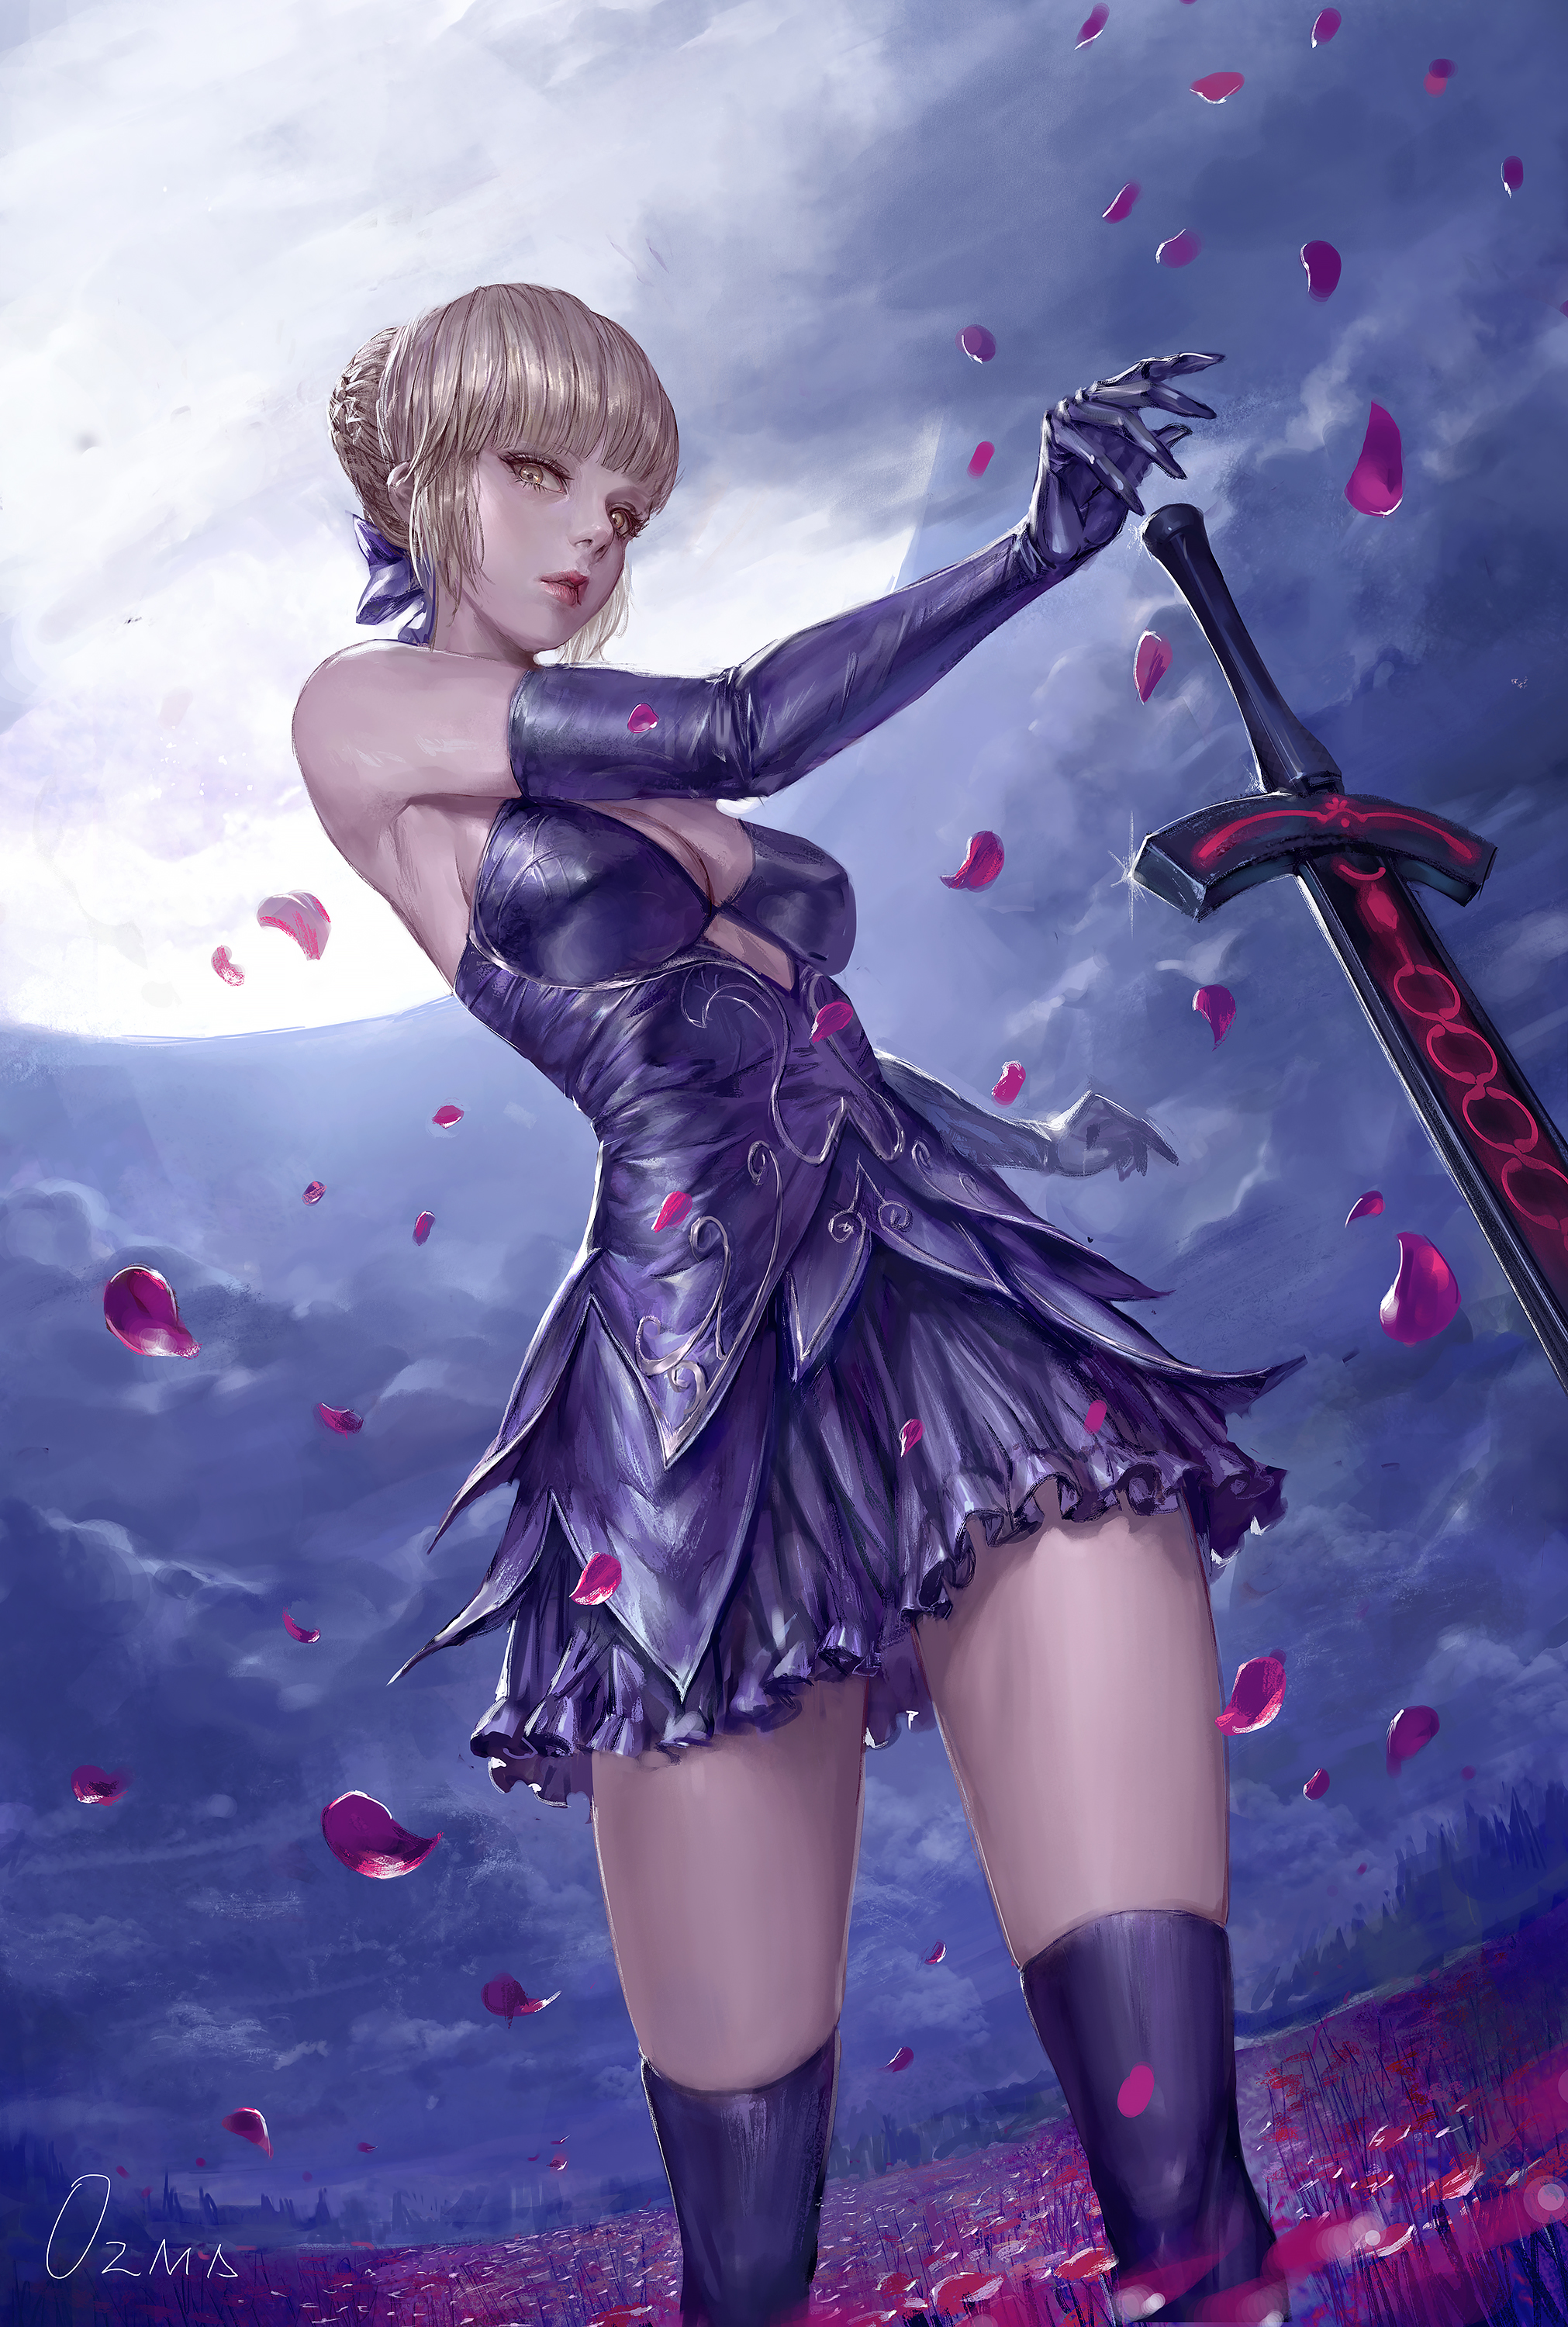 Anime 2022x3000 Fate series Fate/Stay Night fate/stay night: heaven's feel anime girls petals black dress moonlight yellow eyes black stockings Saber Alter Fate/Grand Order Excalibur 2D portrait display blonde Artoria Pendragon